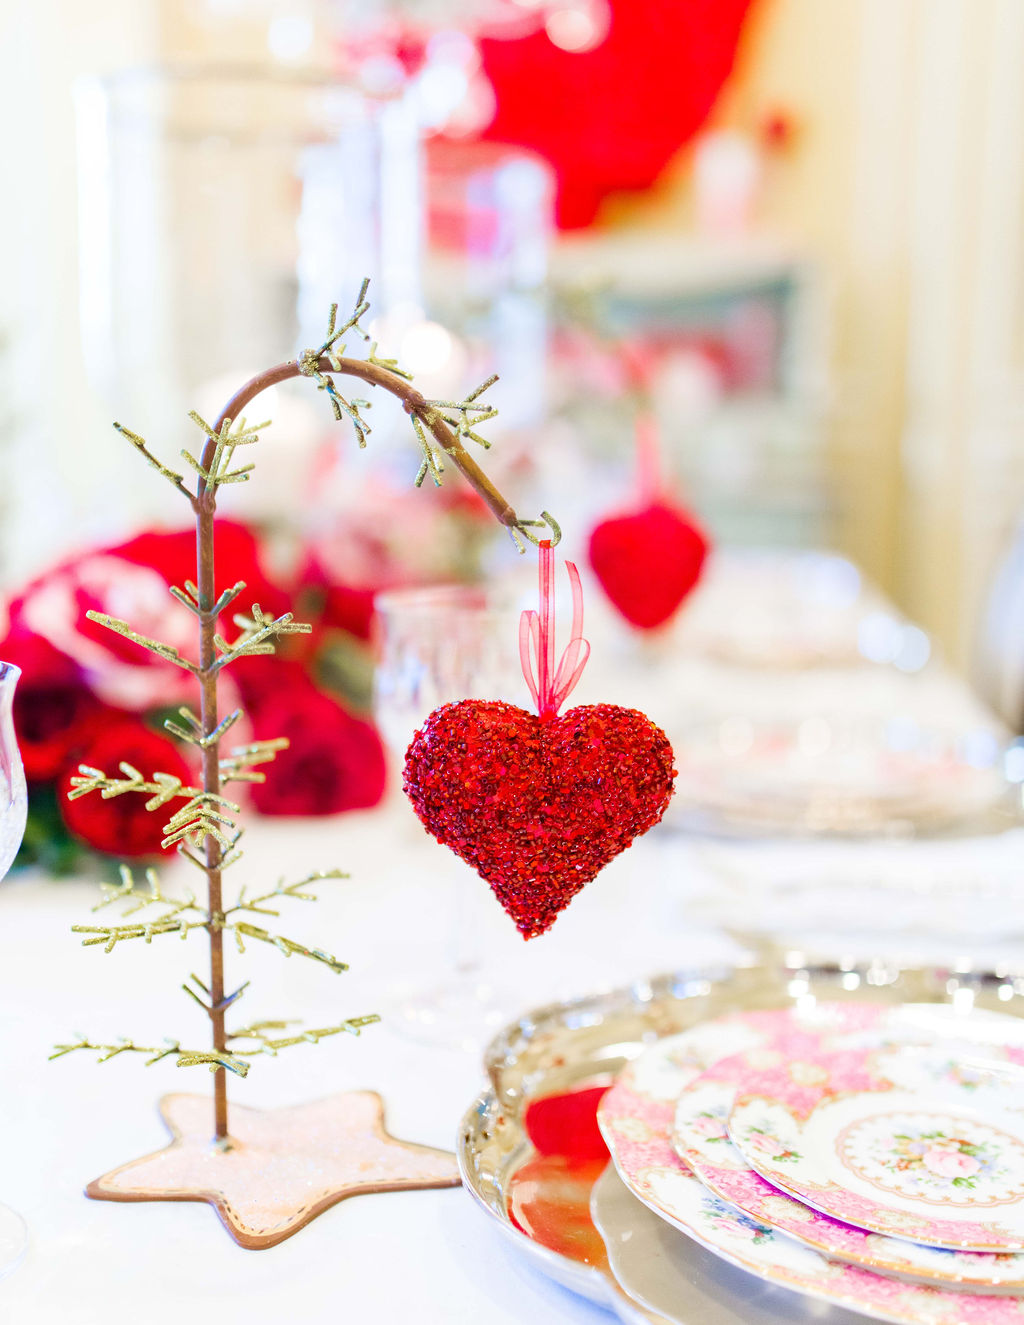 How to be BOLD with your Valentine's Decor